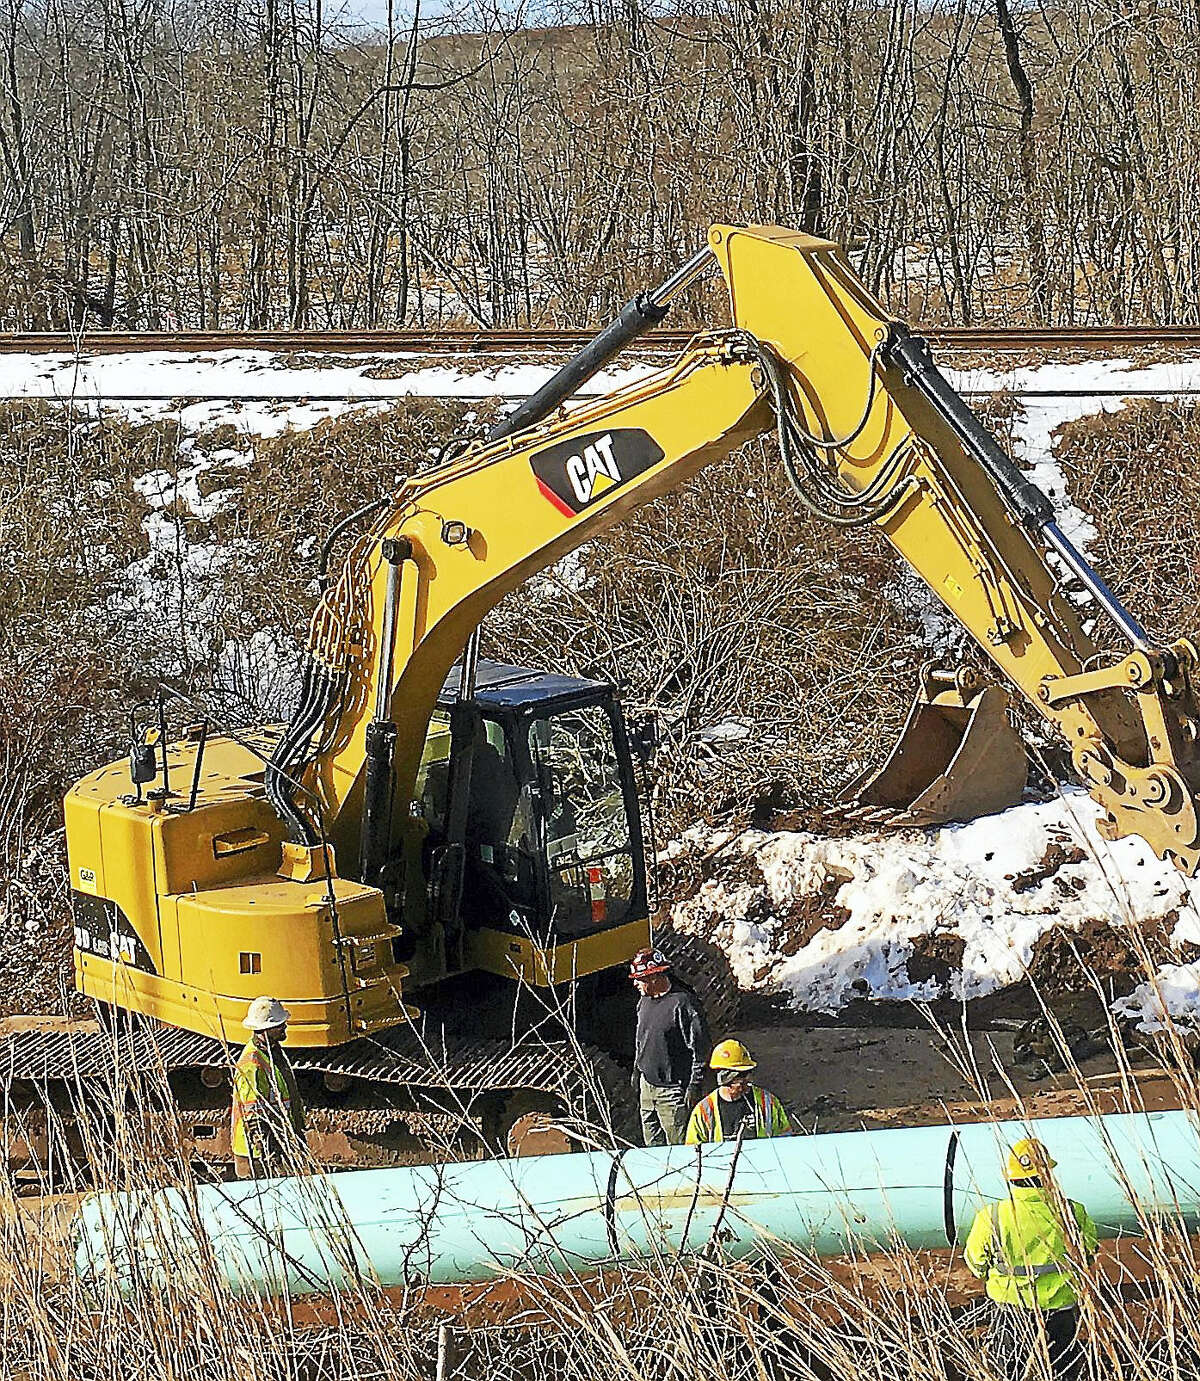 Construction workers can be seen from Route 9 working on the horizontal directional drilling pipe under the Mattabassett River at the Middletown-Cromwell line.